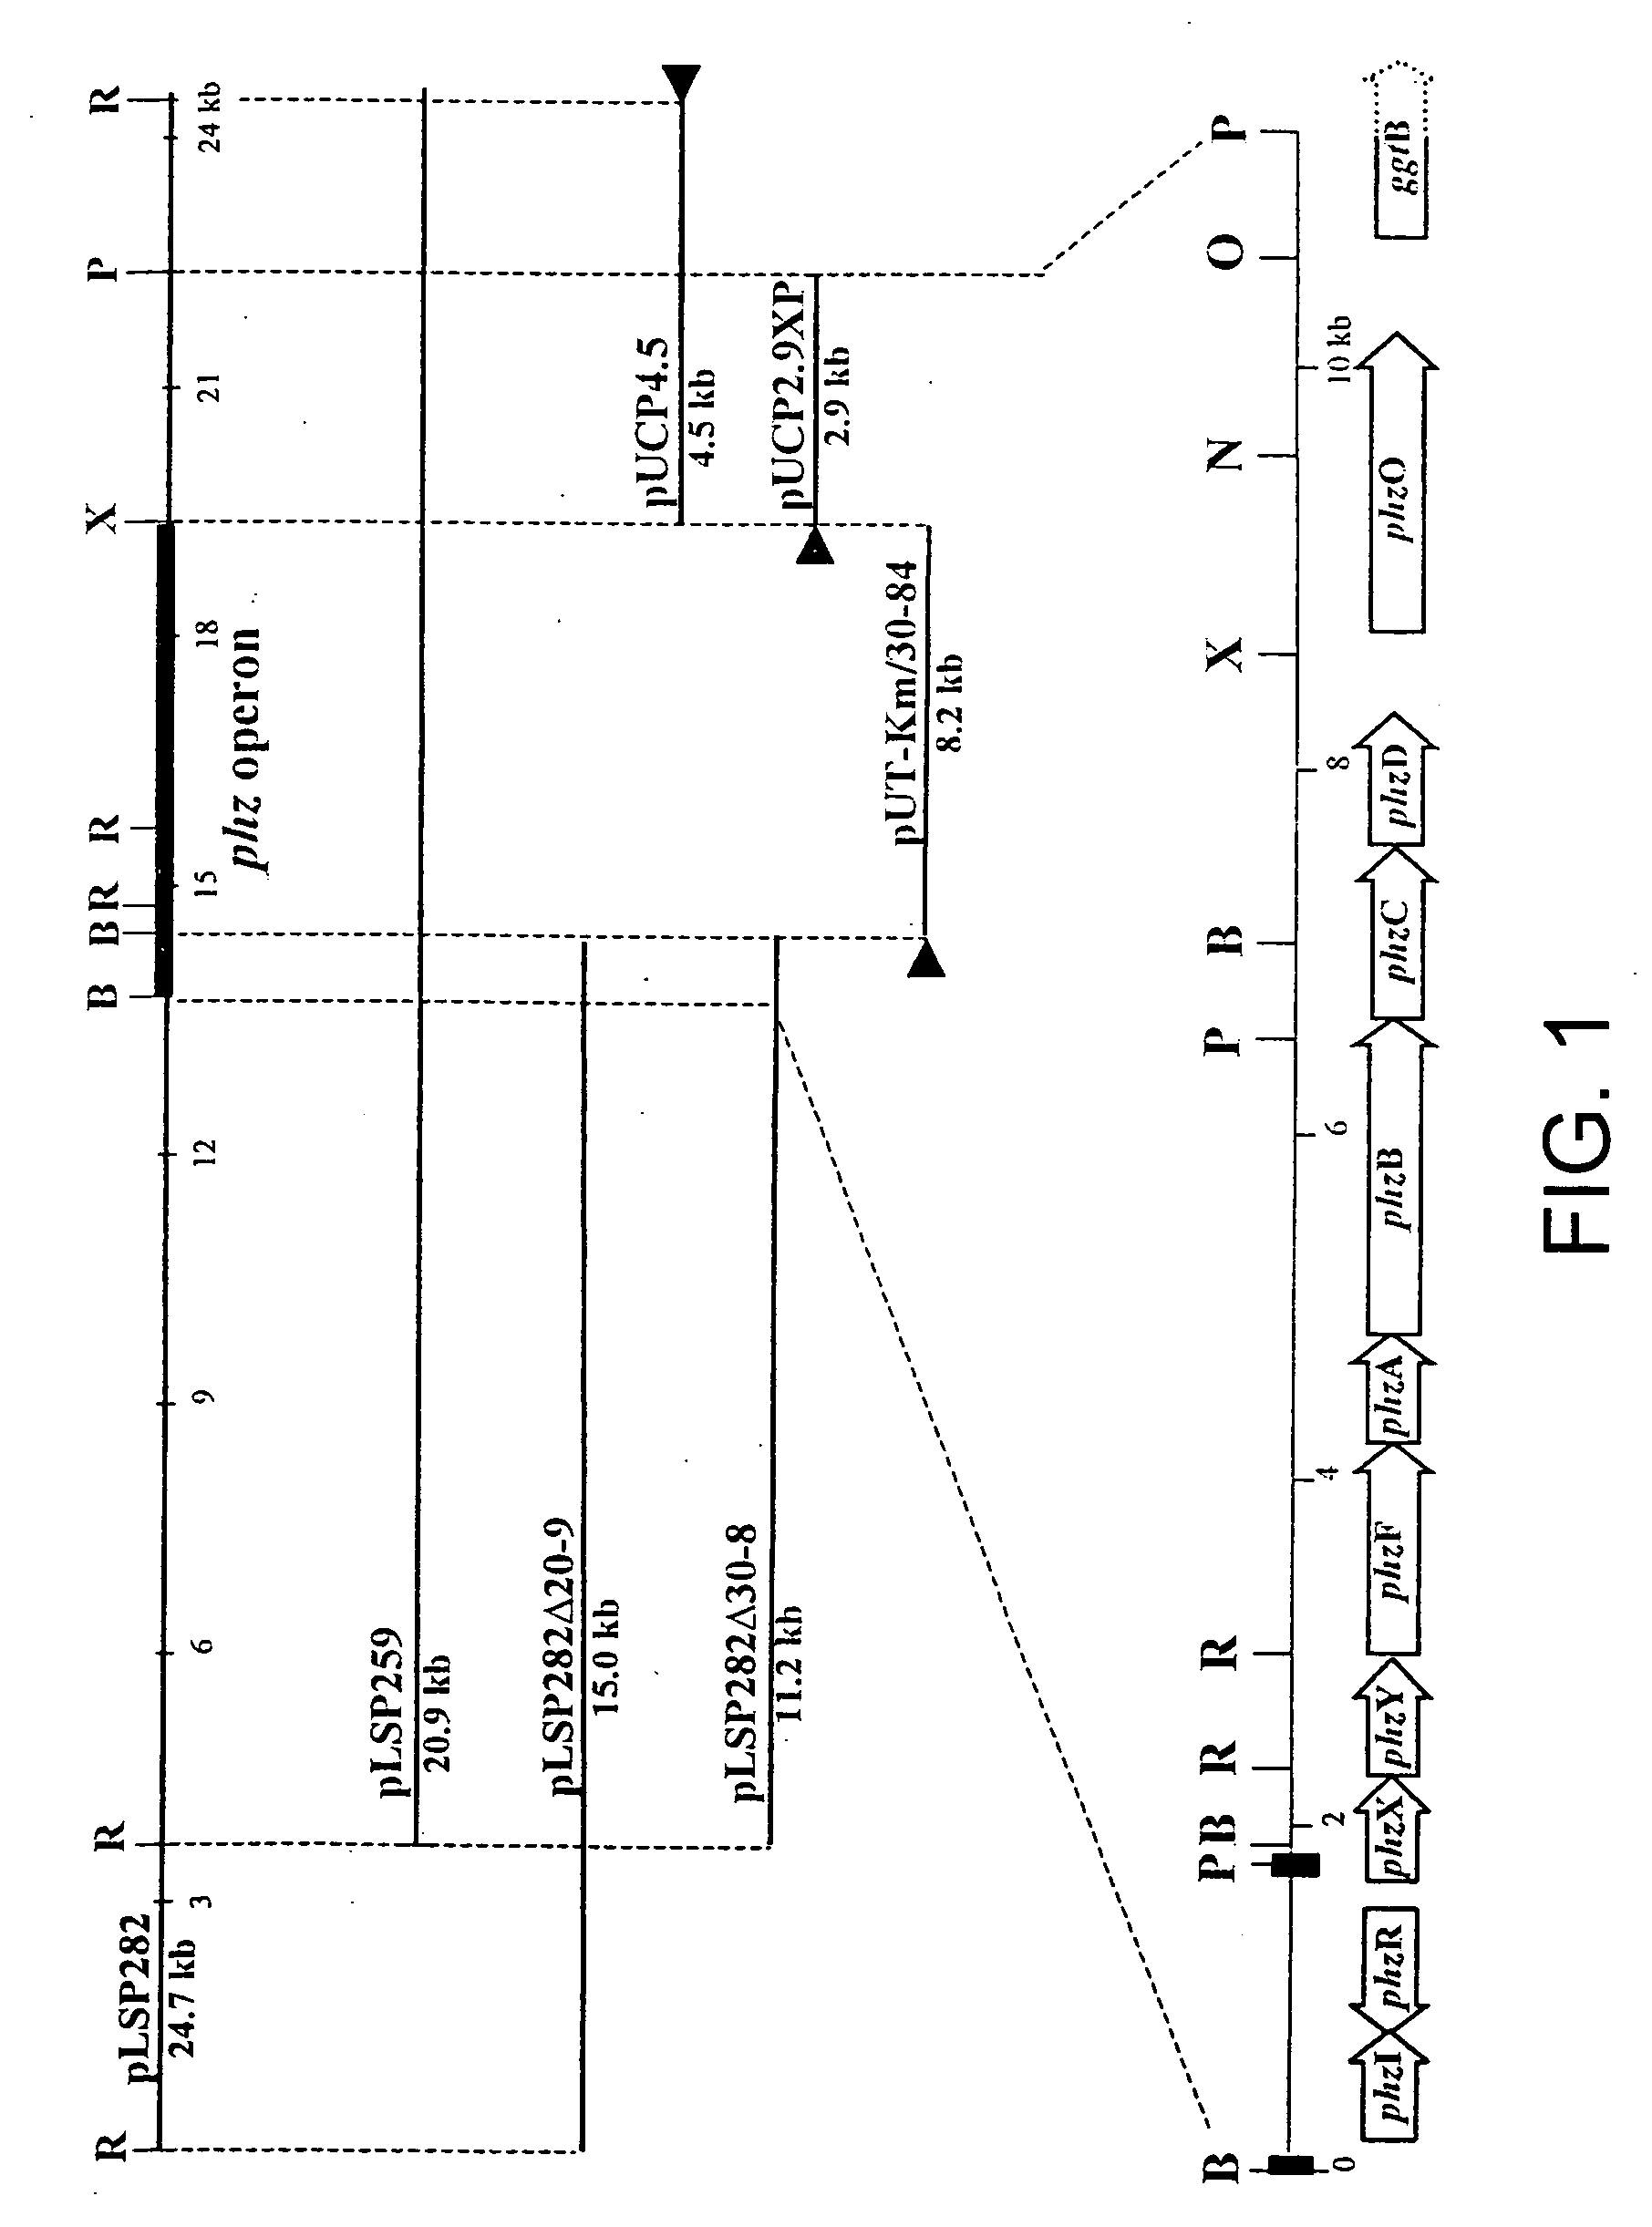 Sequences encoding PhzO and methods